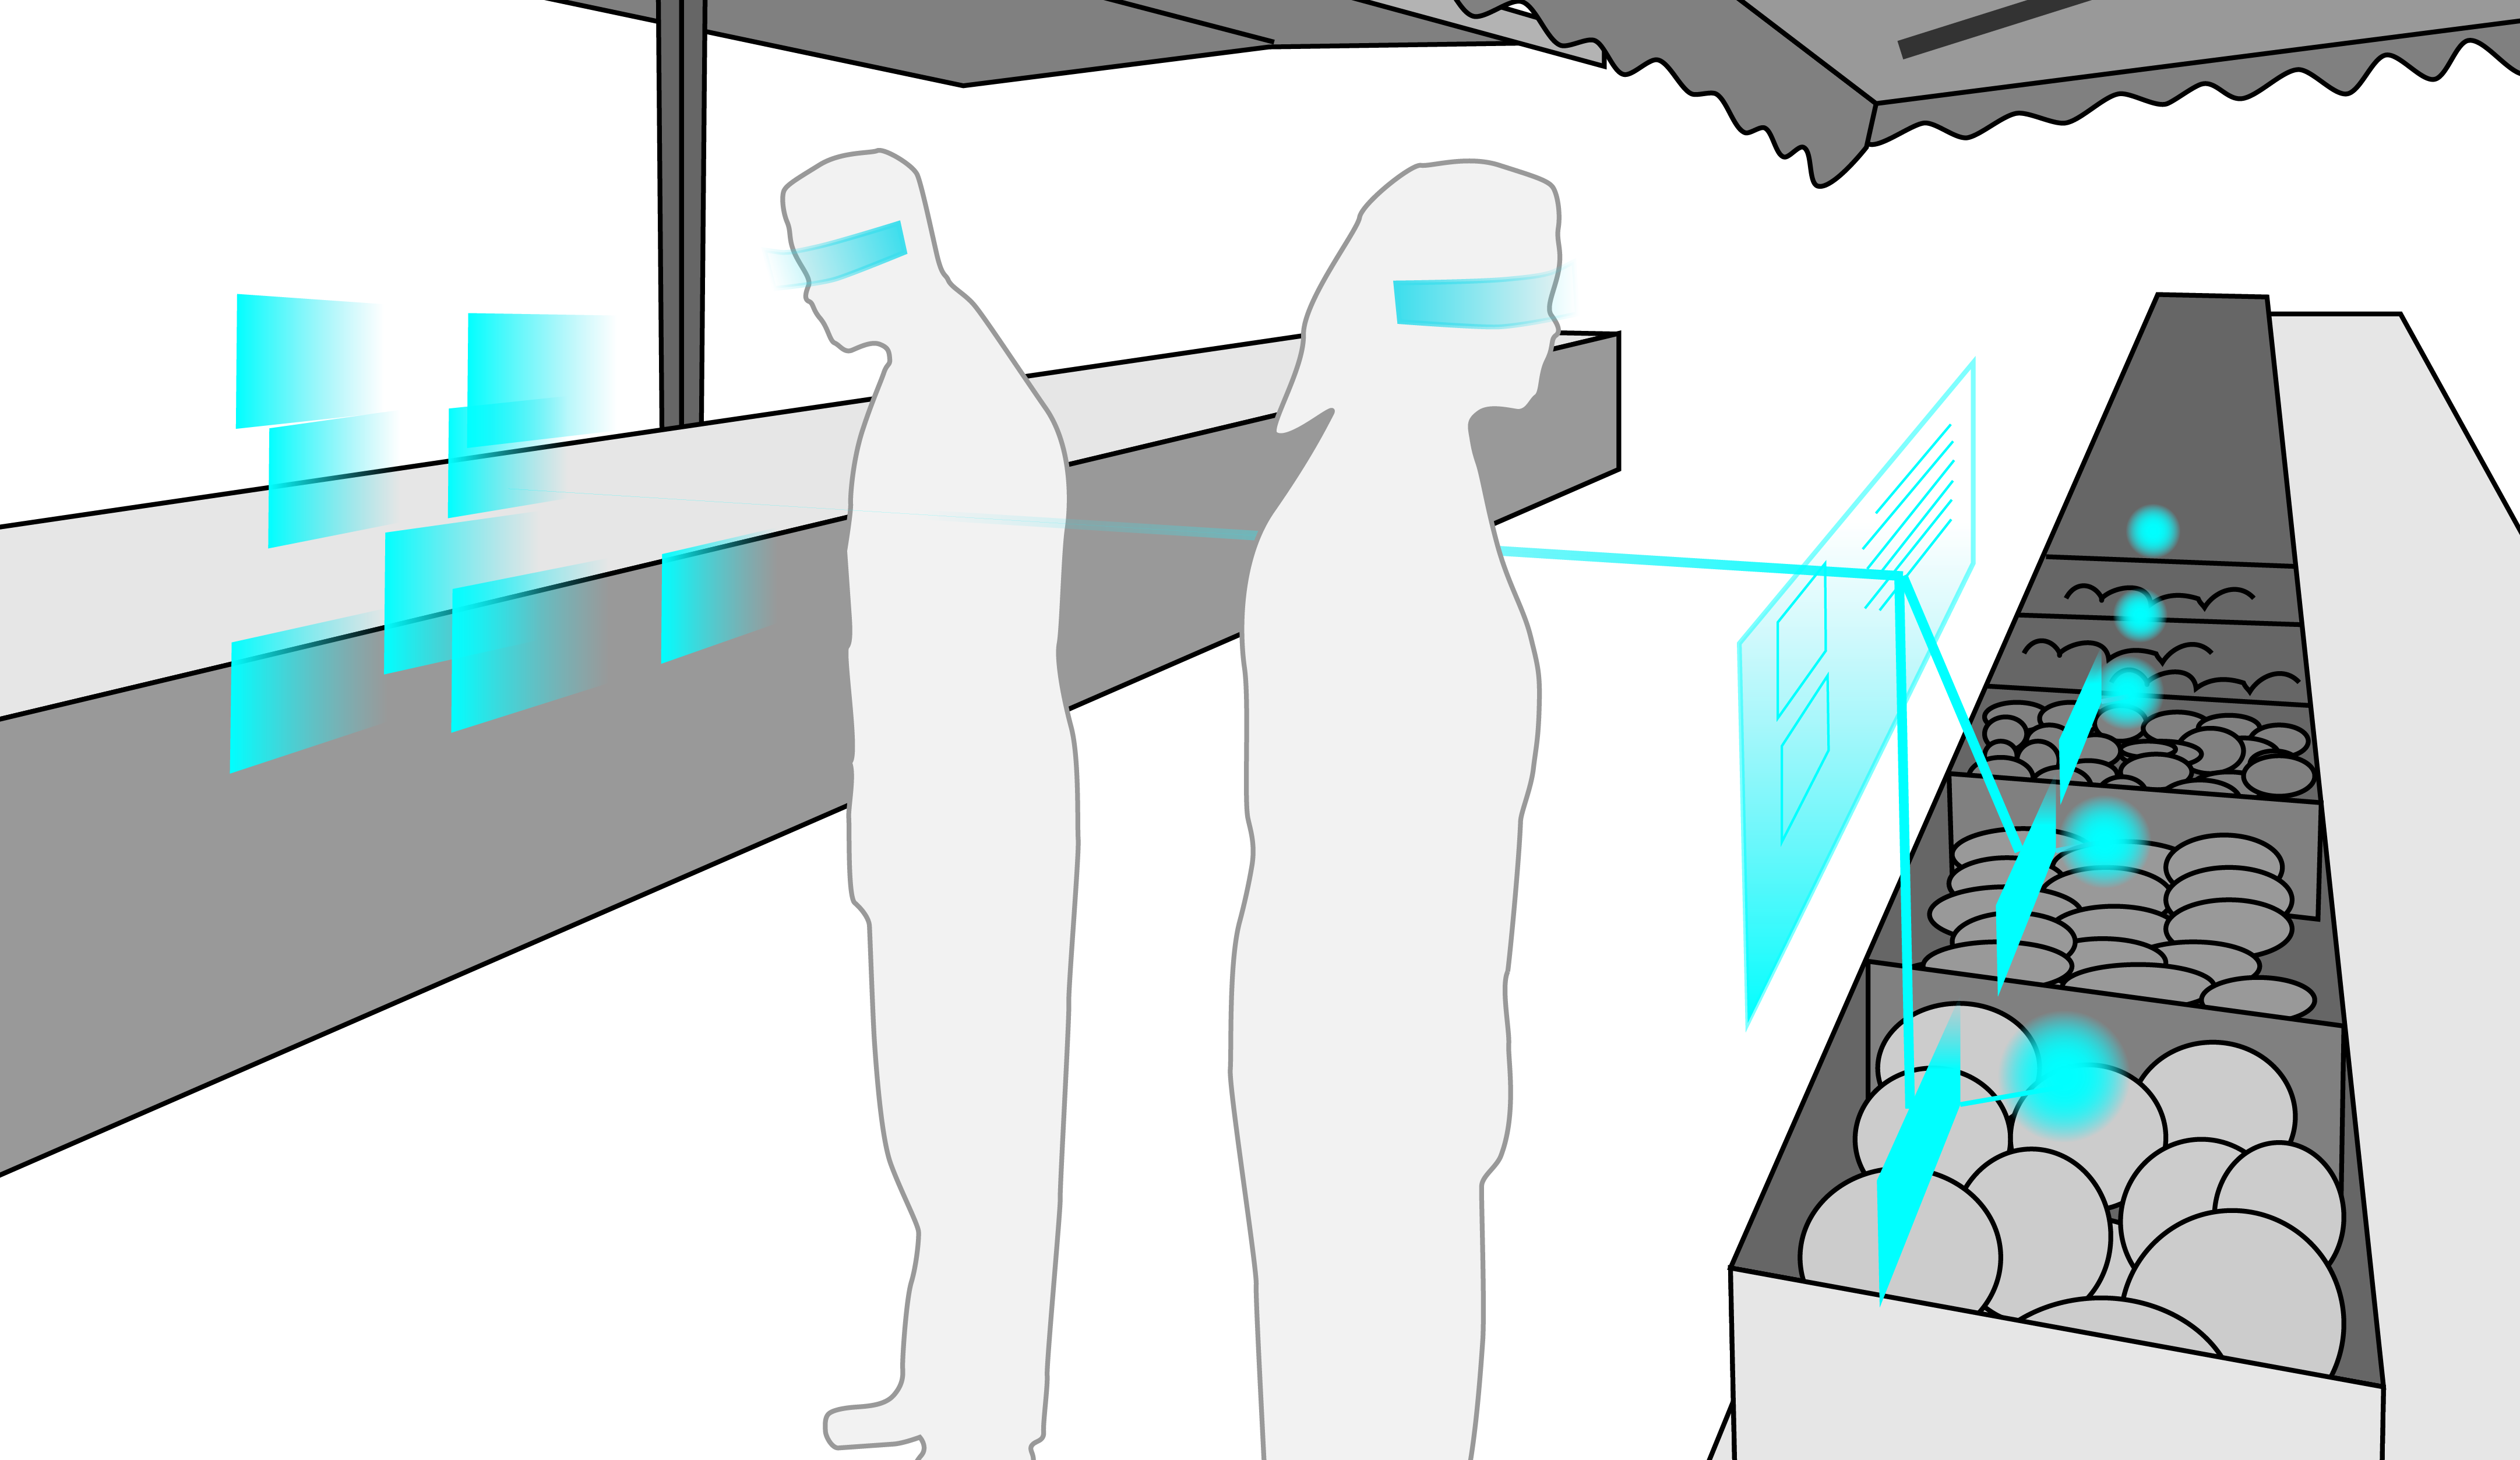 Illustration of the envisioned market place scenario, showing two users with AR headsets shopping for groceries.